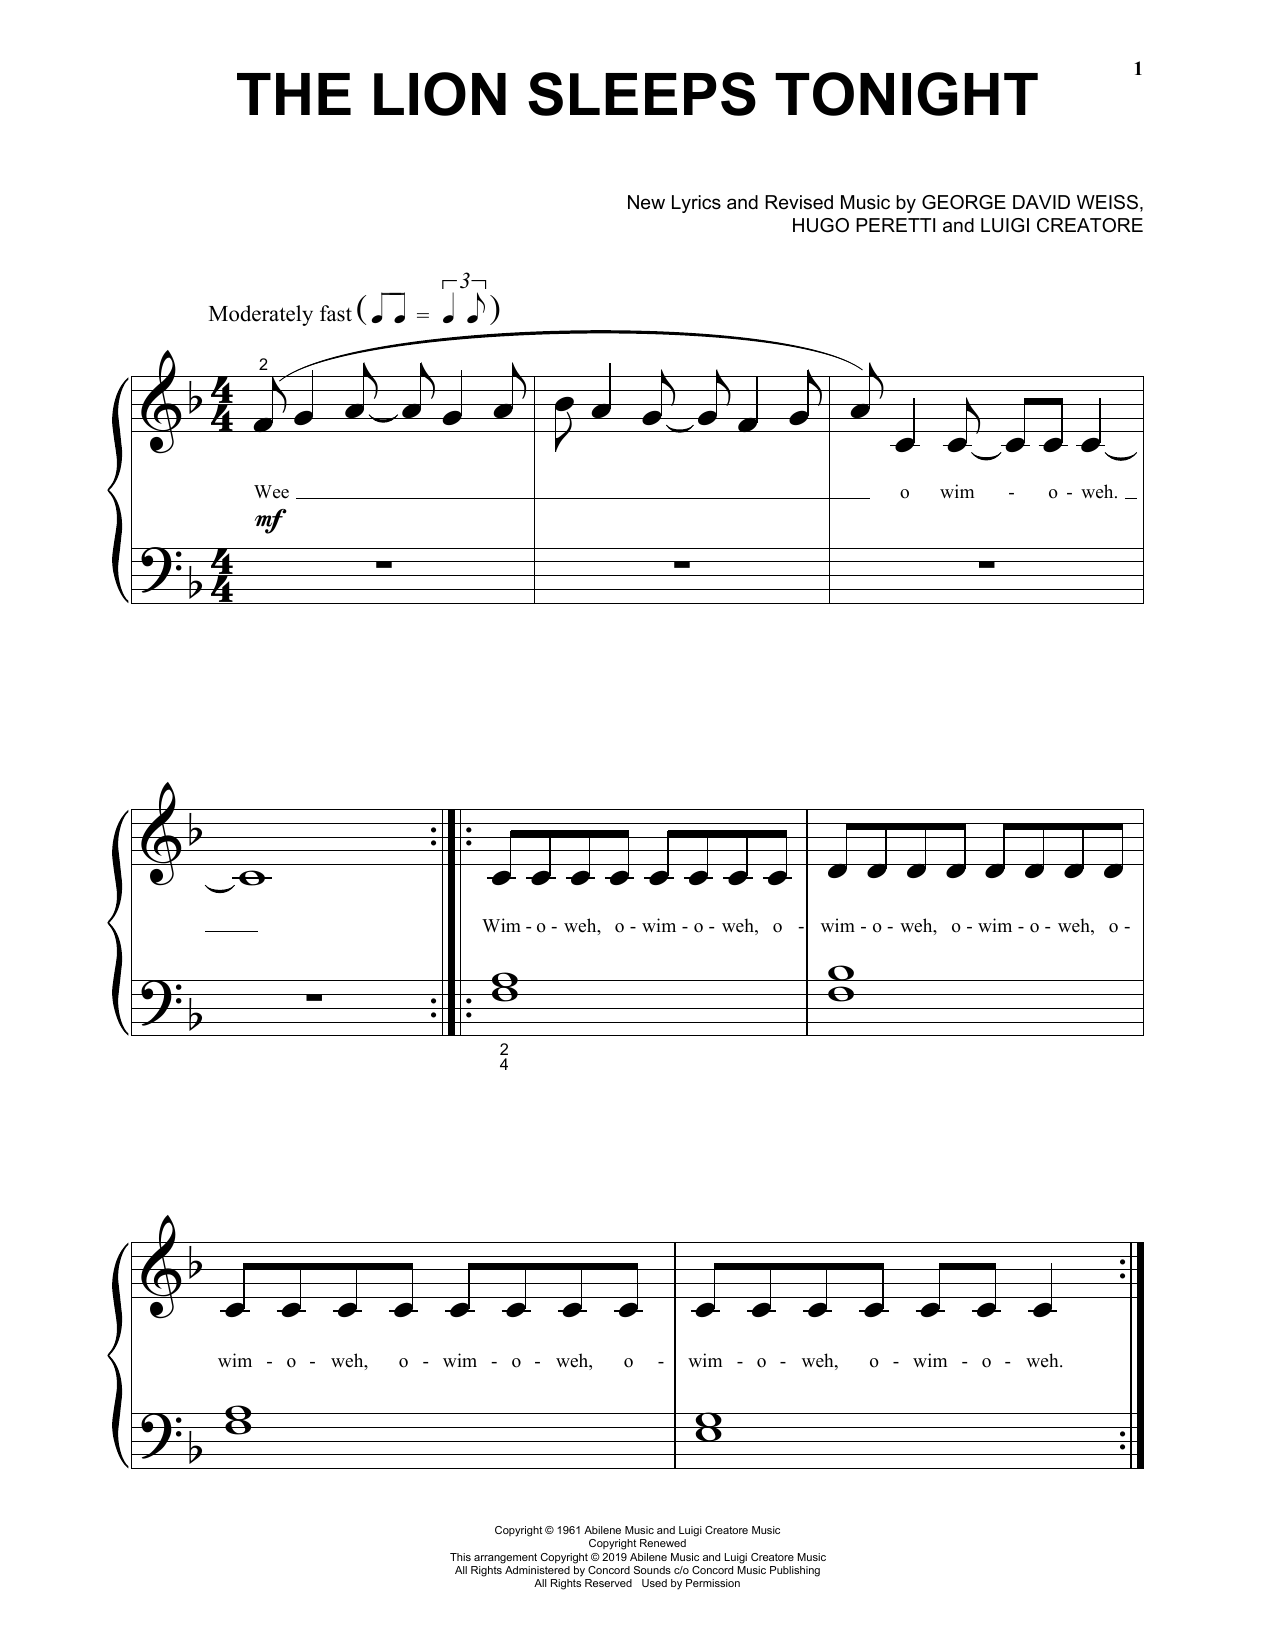 Download Billy Eichner and Seth Rogen The Lion Sleeps Tonight (from The Lion Sheet Music